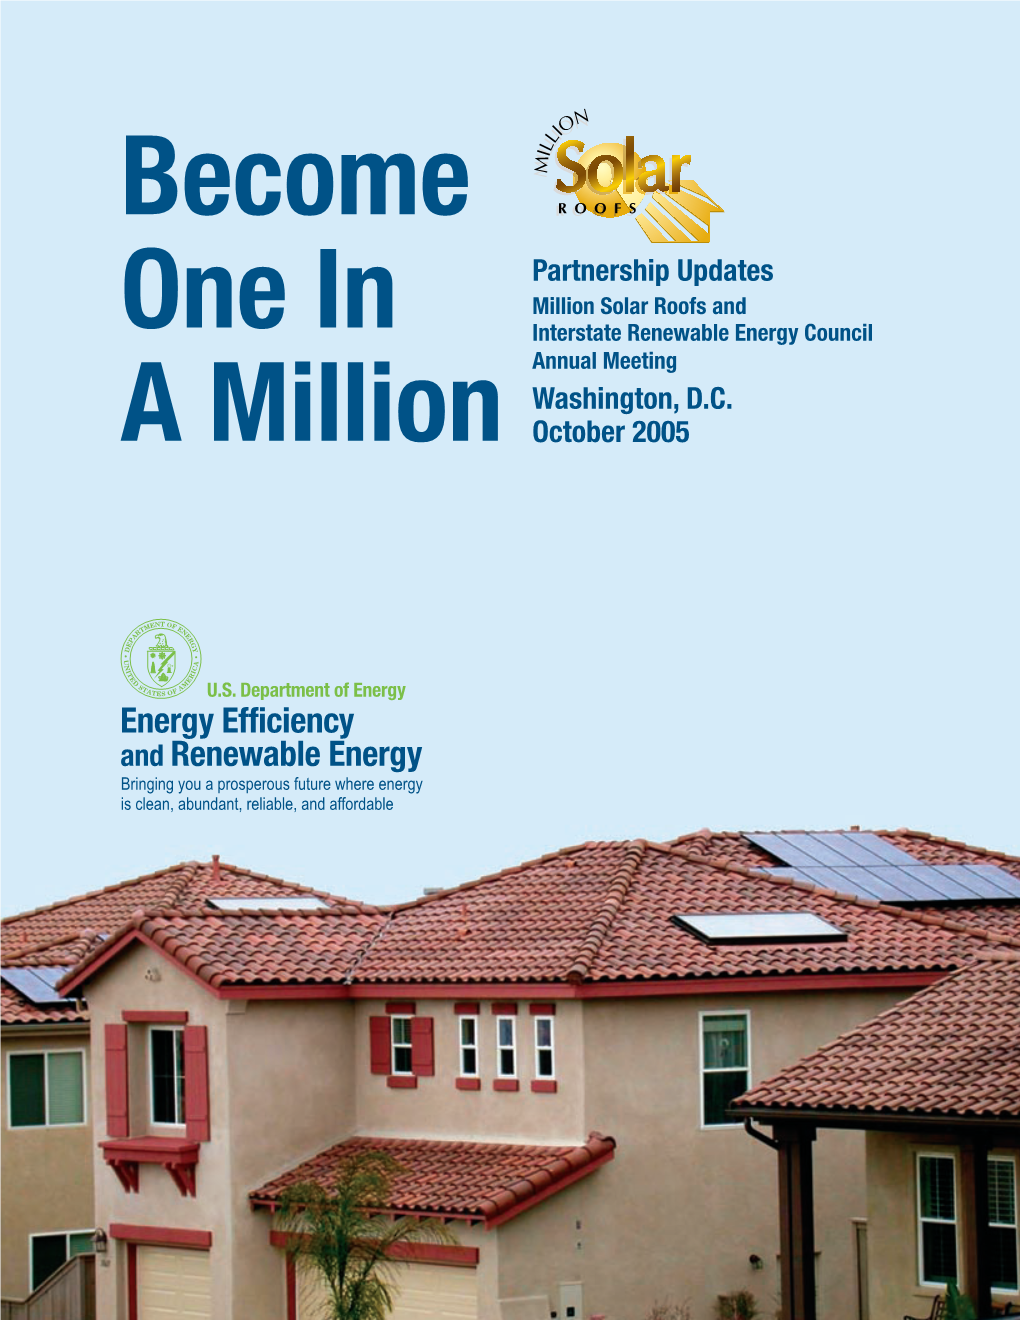 Partnership Updates. Million Solar Roofs and Interstate